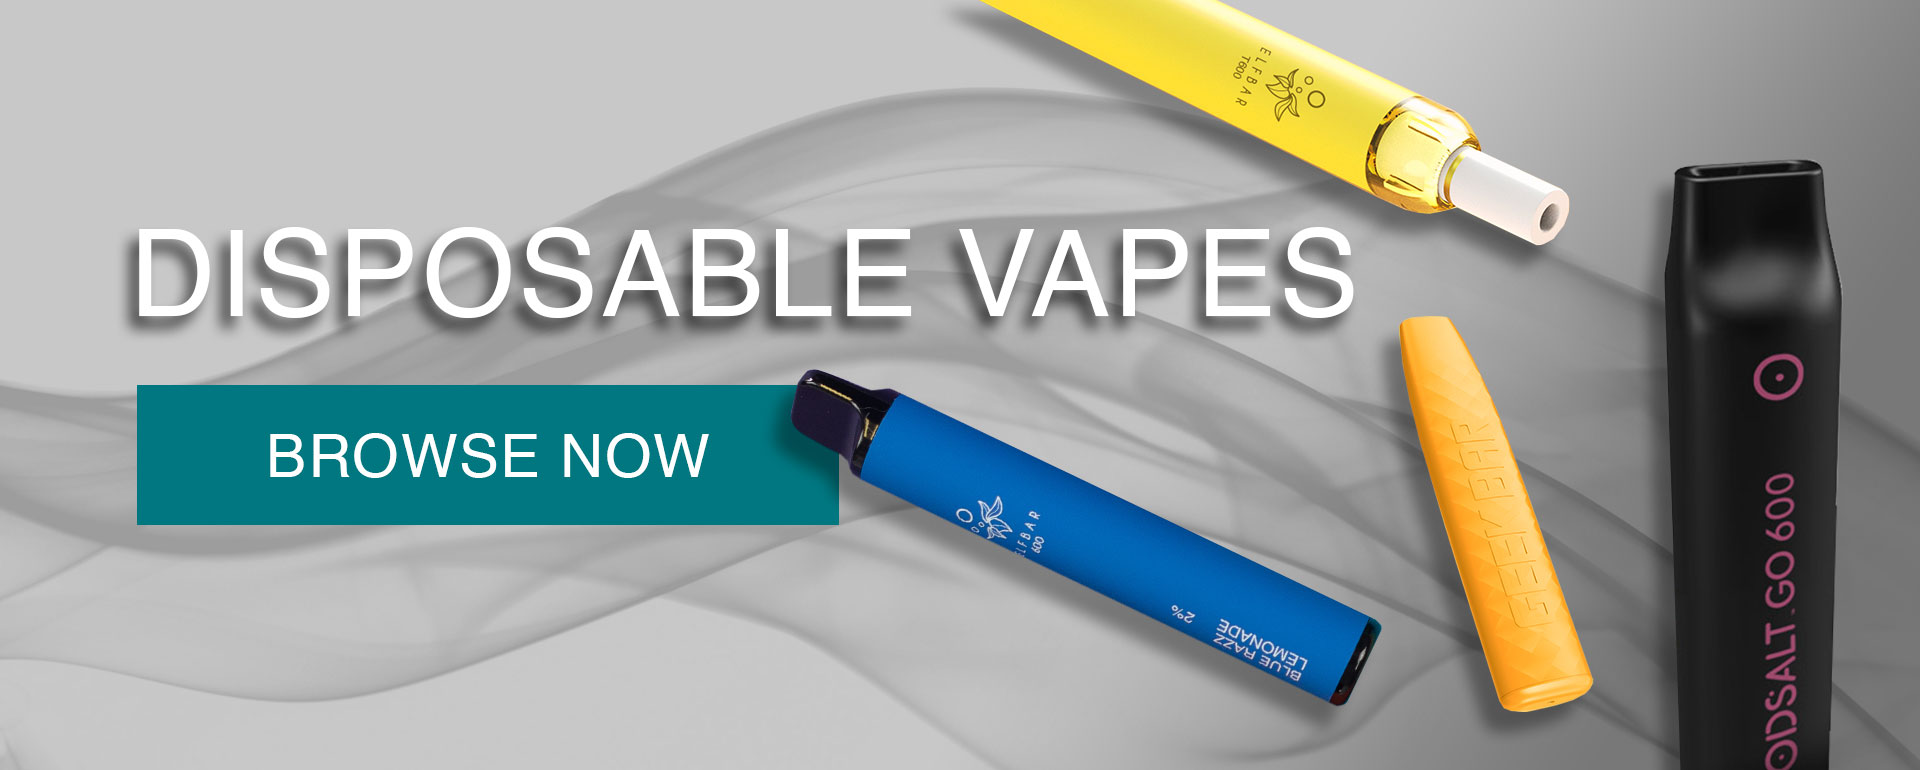 Disposable Vapes Browse Now